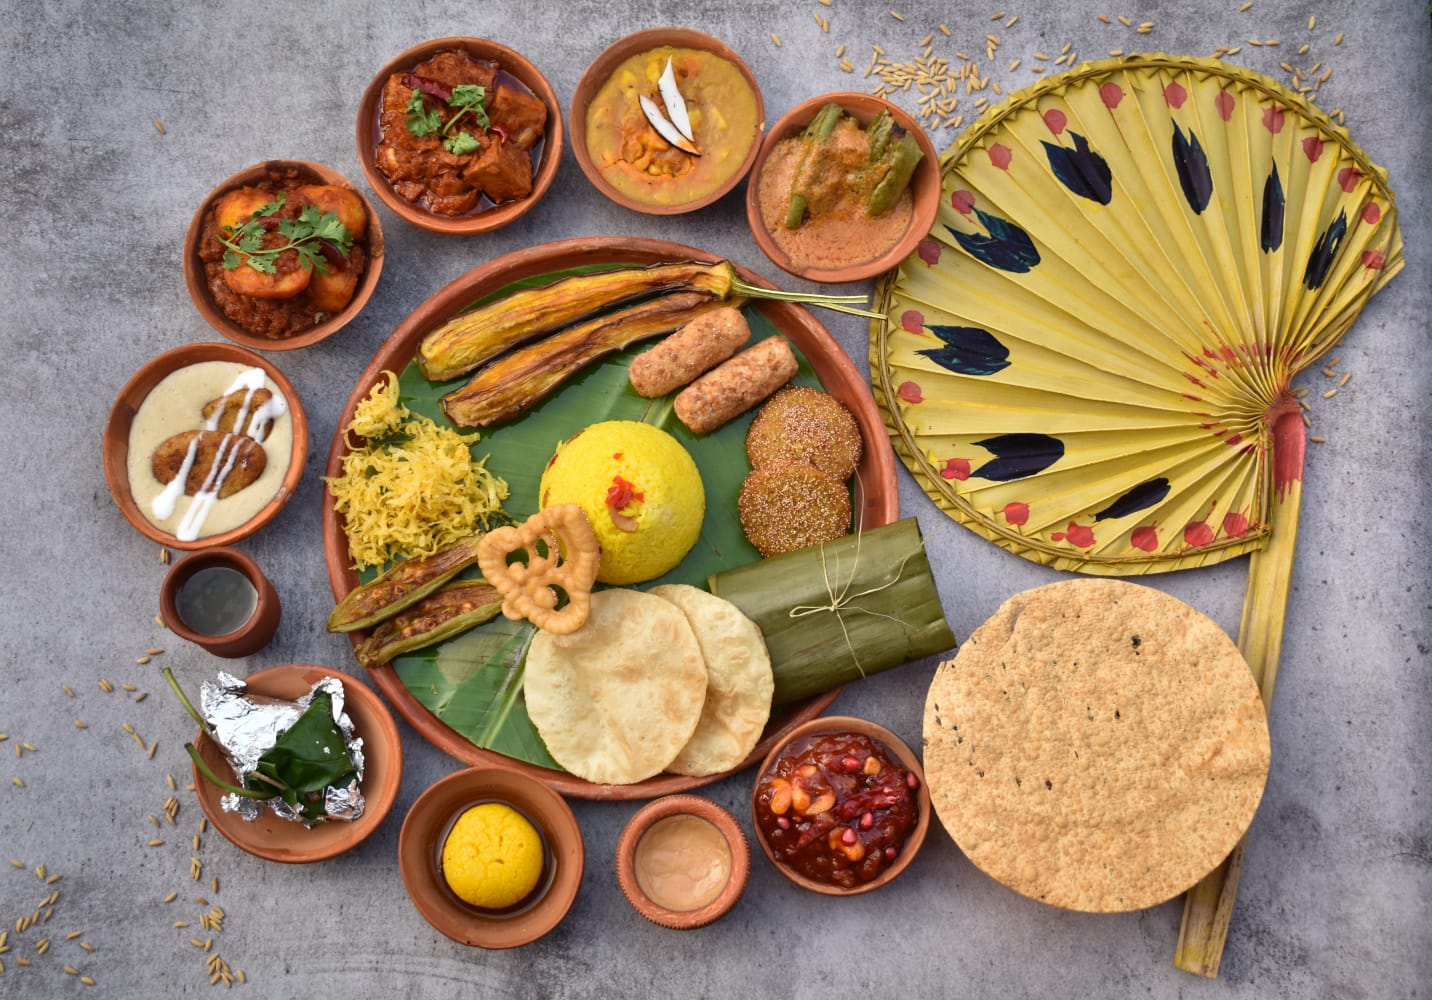 Poila Boishakh Offerings at Cloud Social Rooftop Lounge🍽️